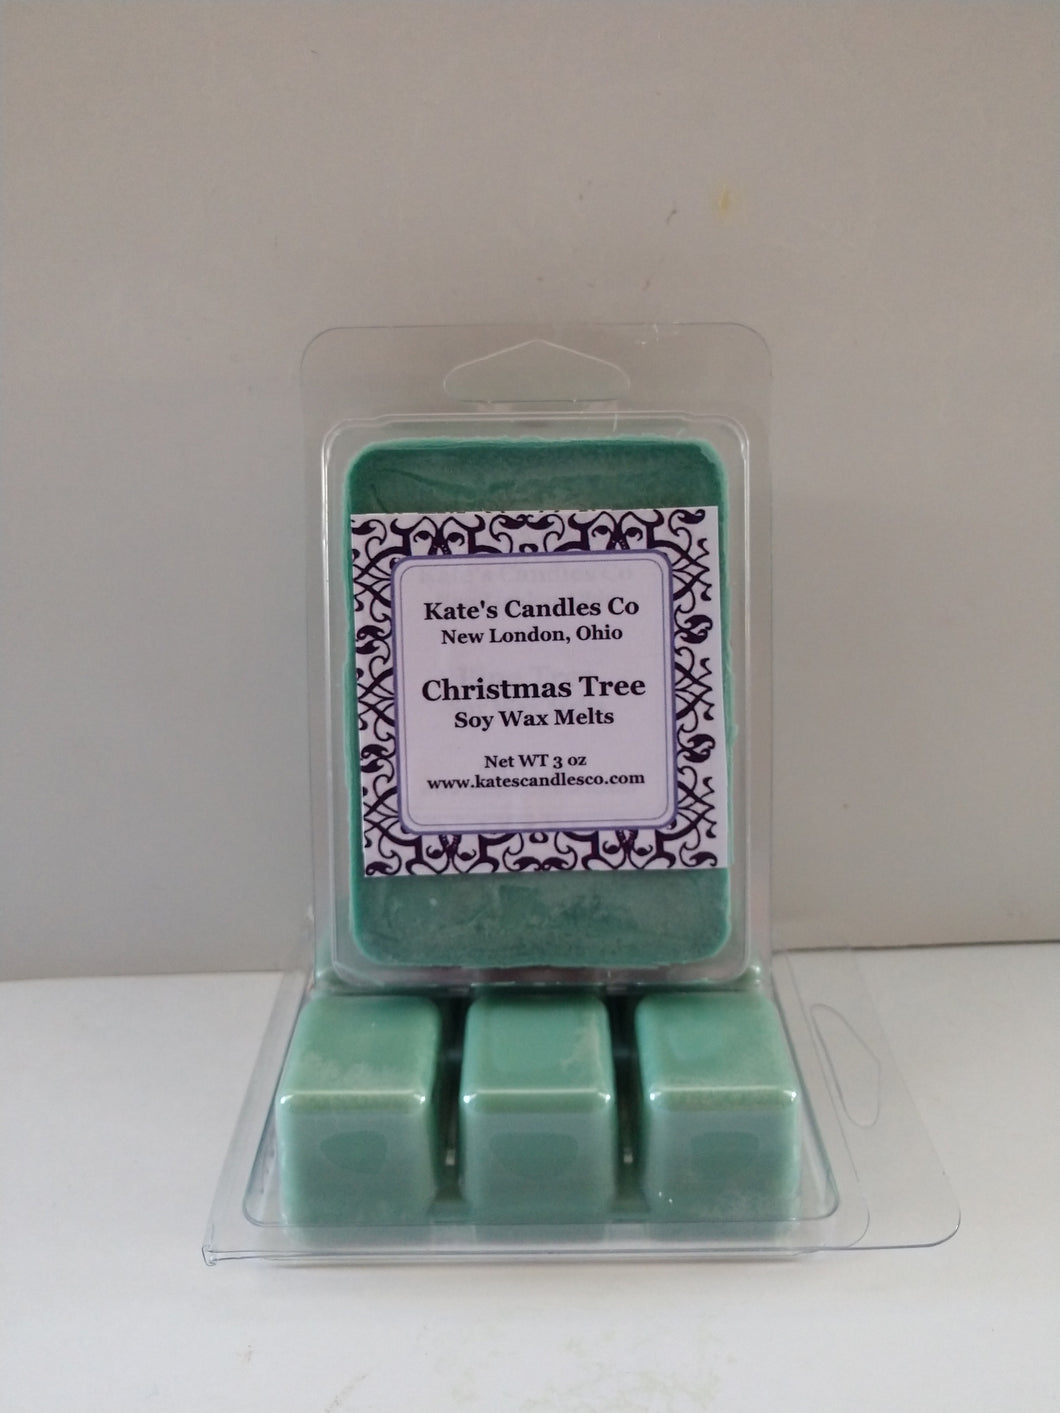 Christmas Tree Soy Wax Melts - Kate's Candles Co. Soy Candles